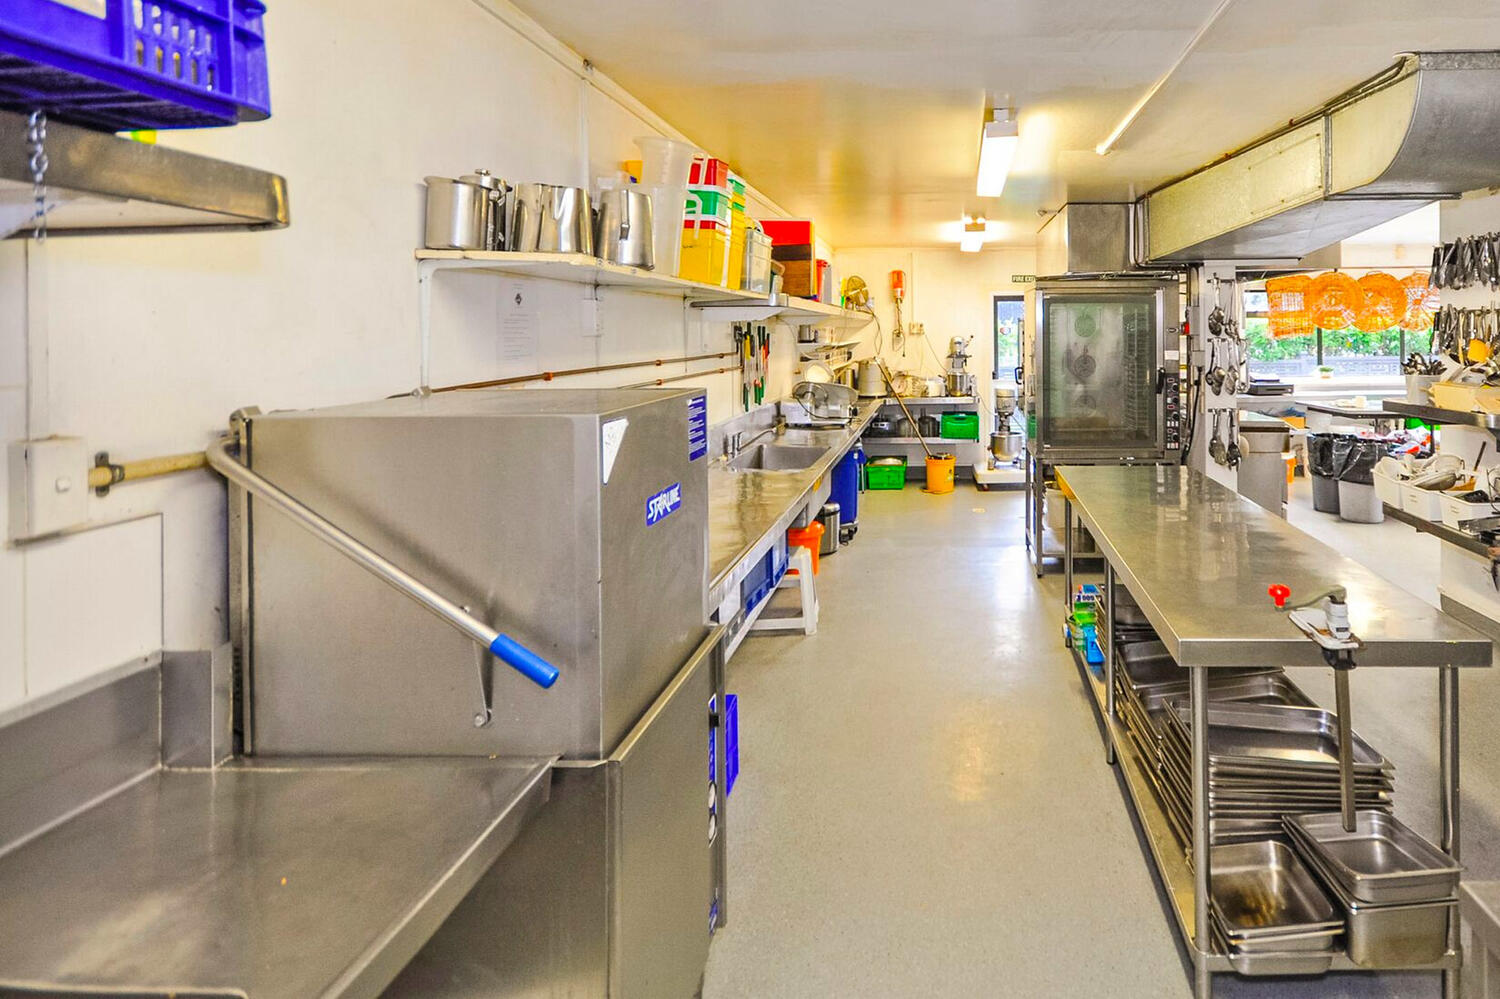 Catering Business Browns Bay - For Sale by Kakapo Business Sales